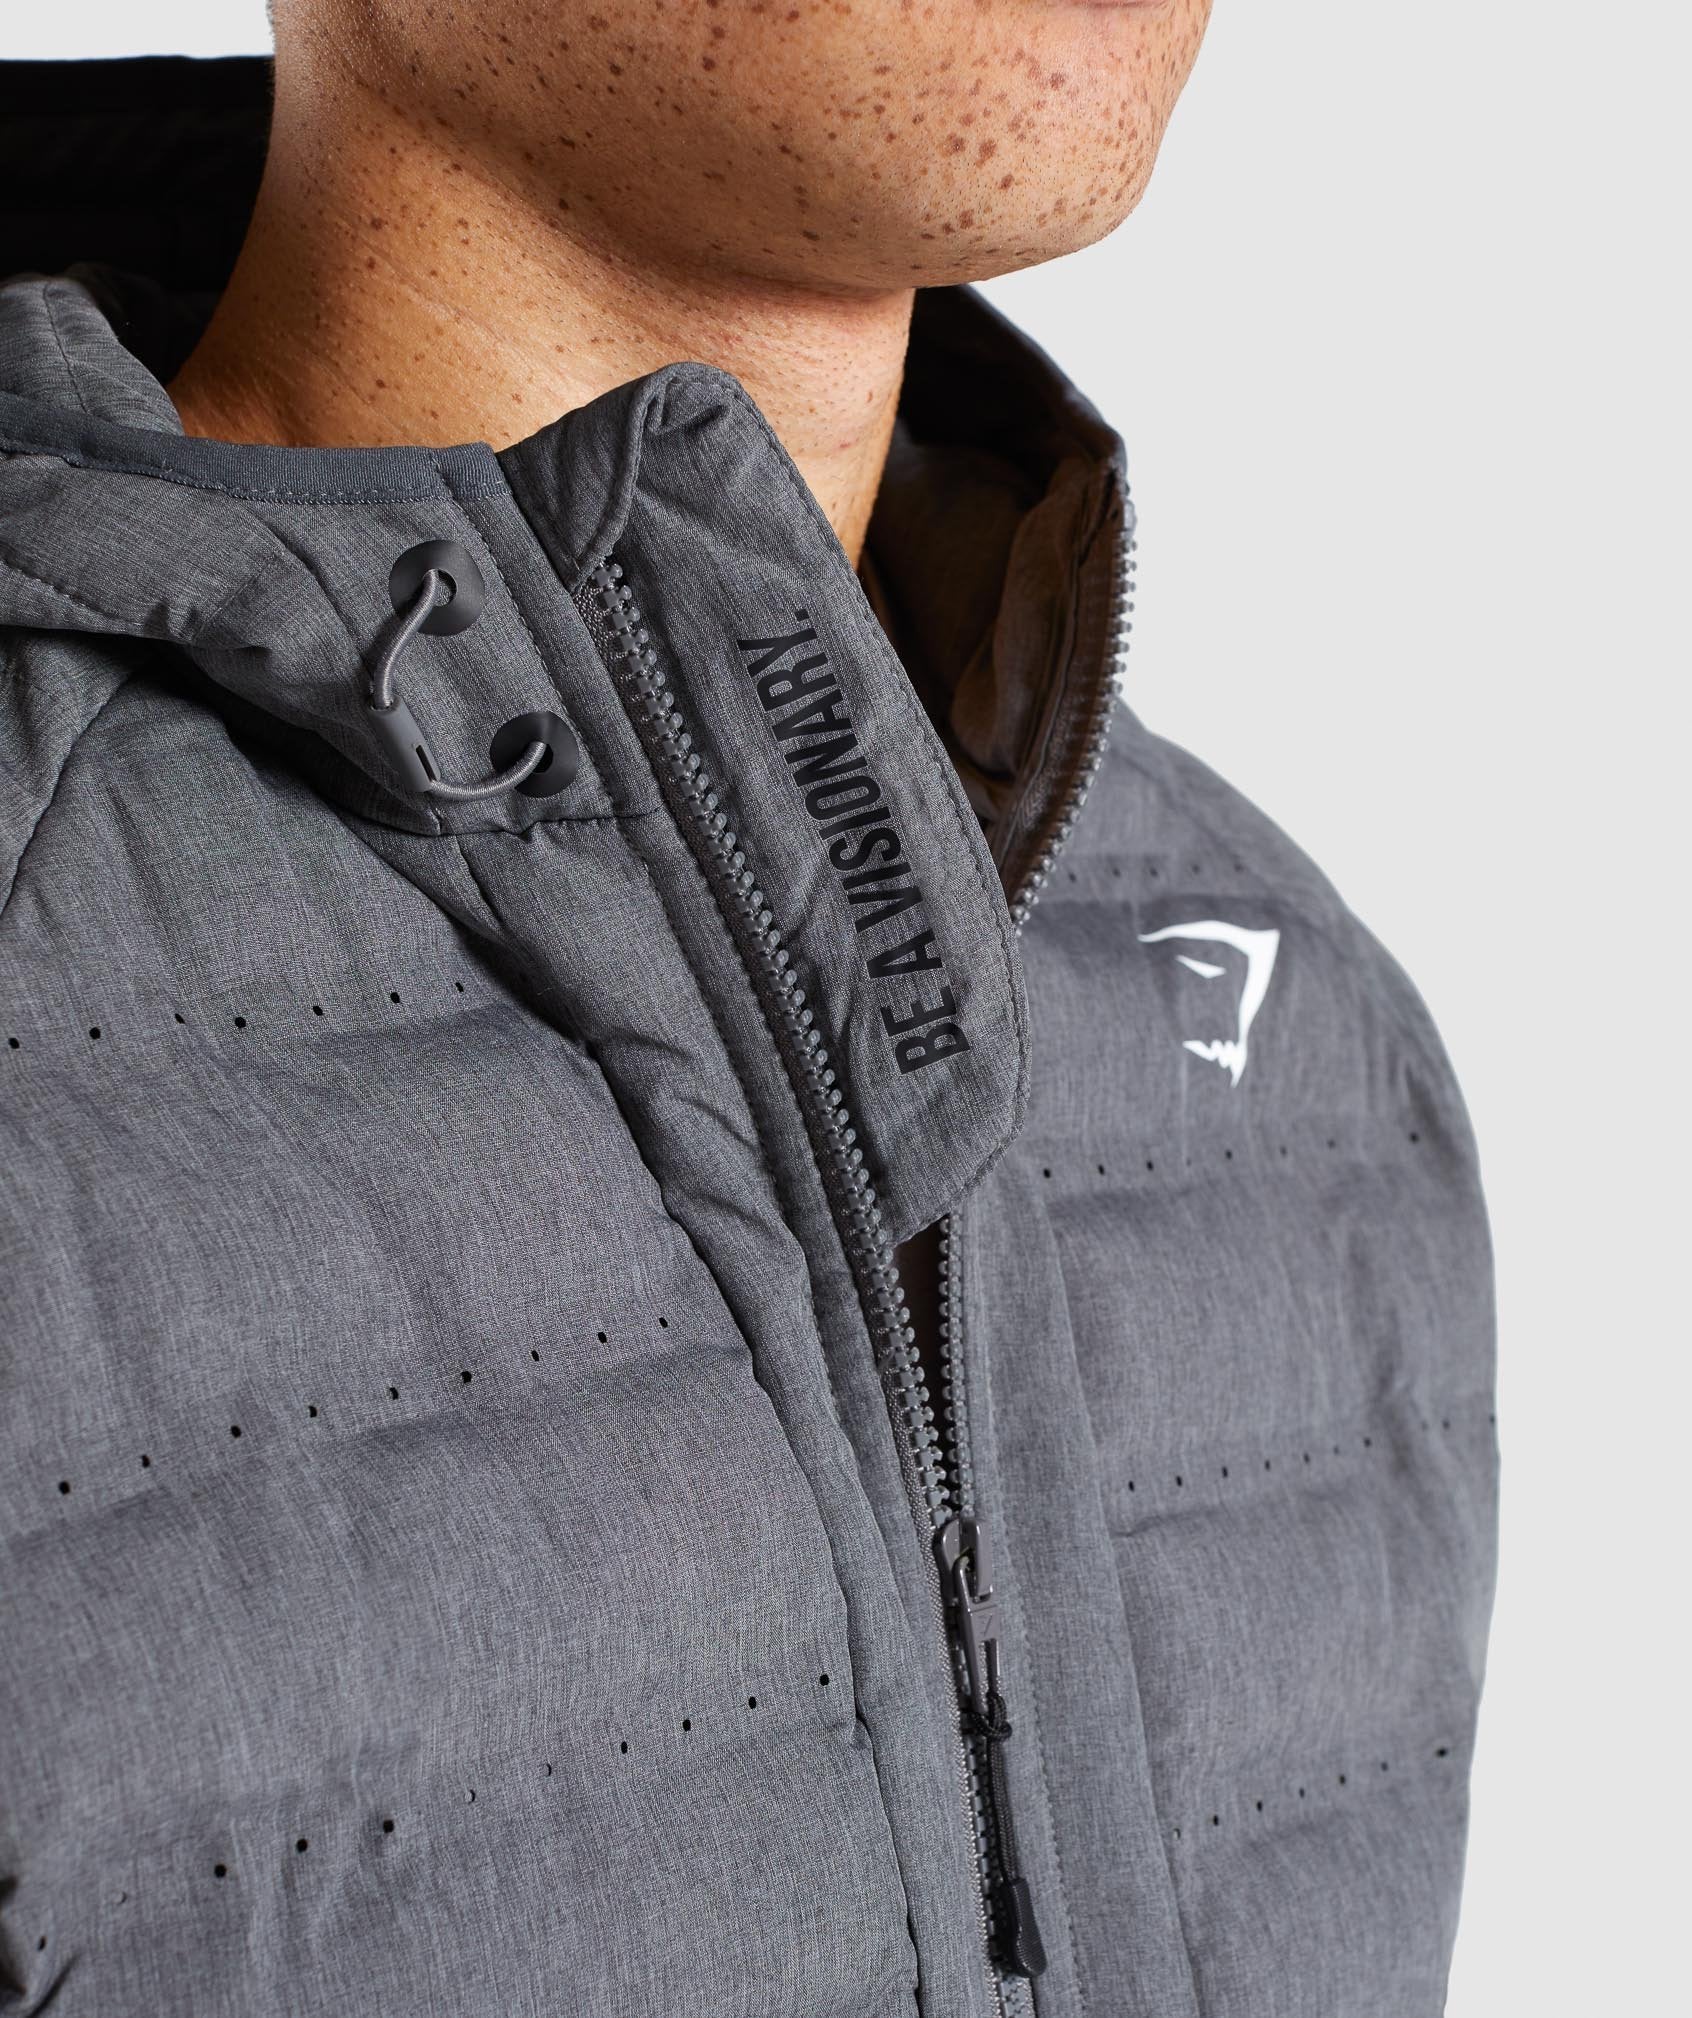 Sector Jacket V2 in Charcoal Marl - view 5